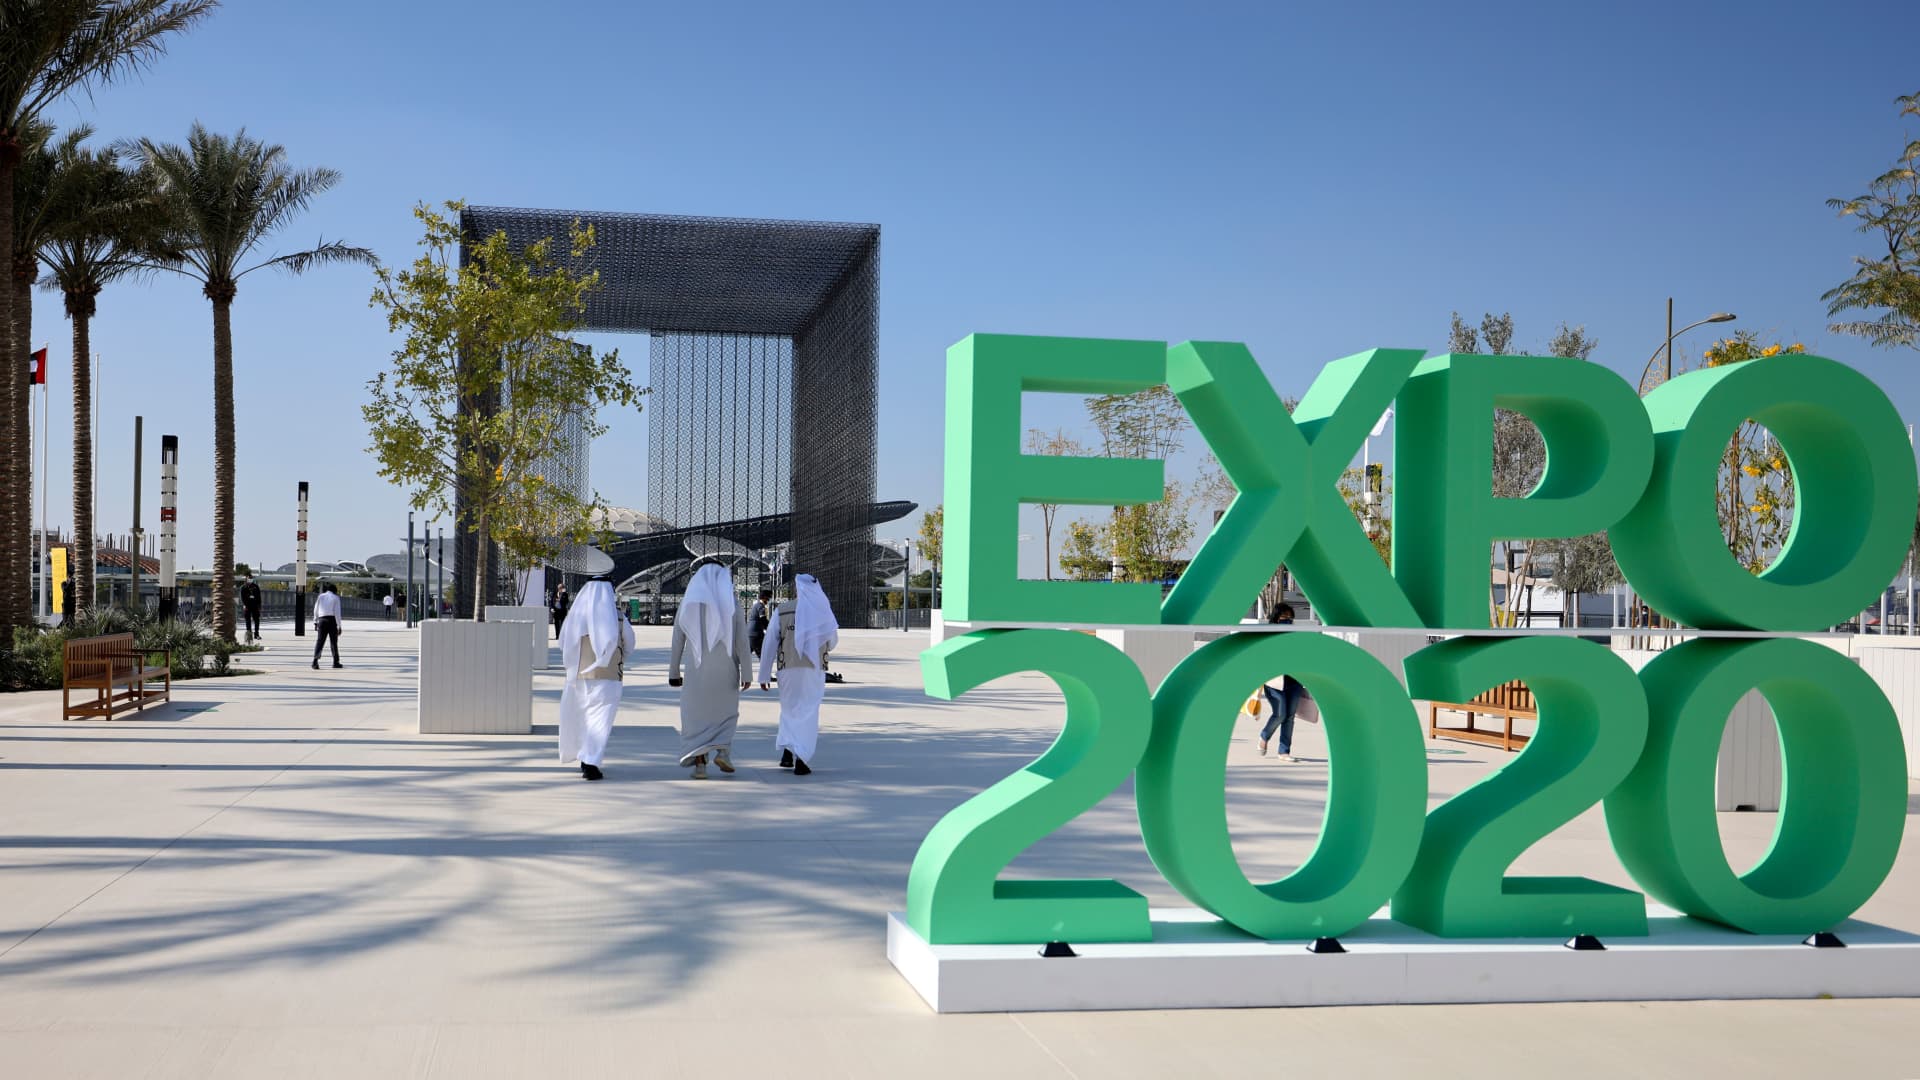 People walk past the official sign marking the Dubai Expo 2020 near the Sustainability Pavilion in Dubai on January 16, 2021. - The six-month world fair, a milestone for the emirate which has splashed out $8.2 billion on the eye-popping venue in the hope of boosting its soft power and resetting the economy, will now open its doors in October 2021.